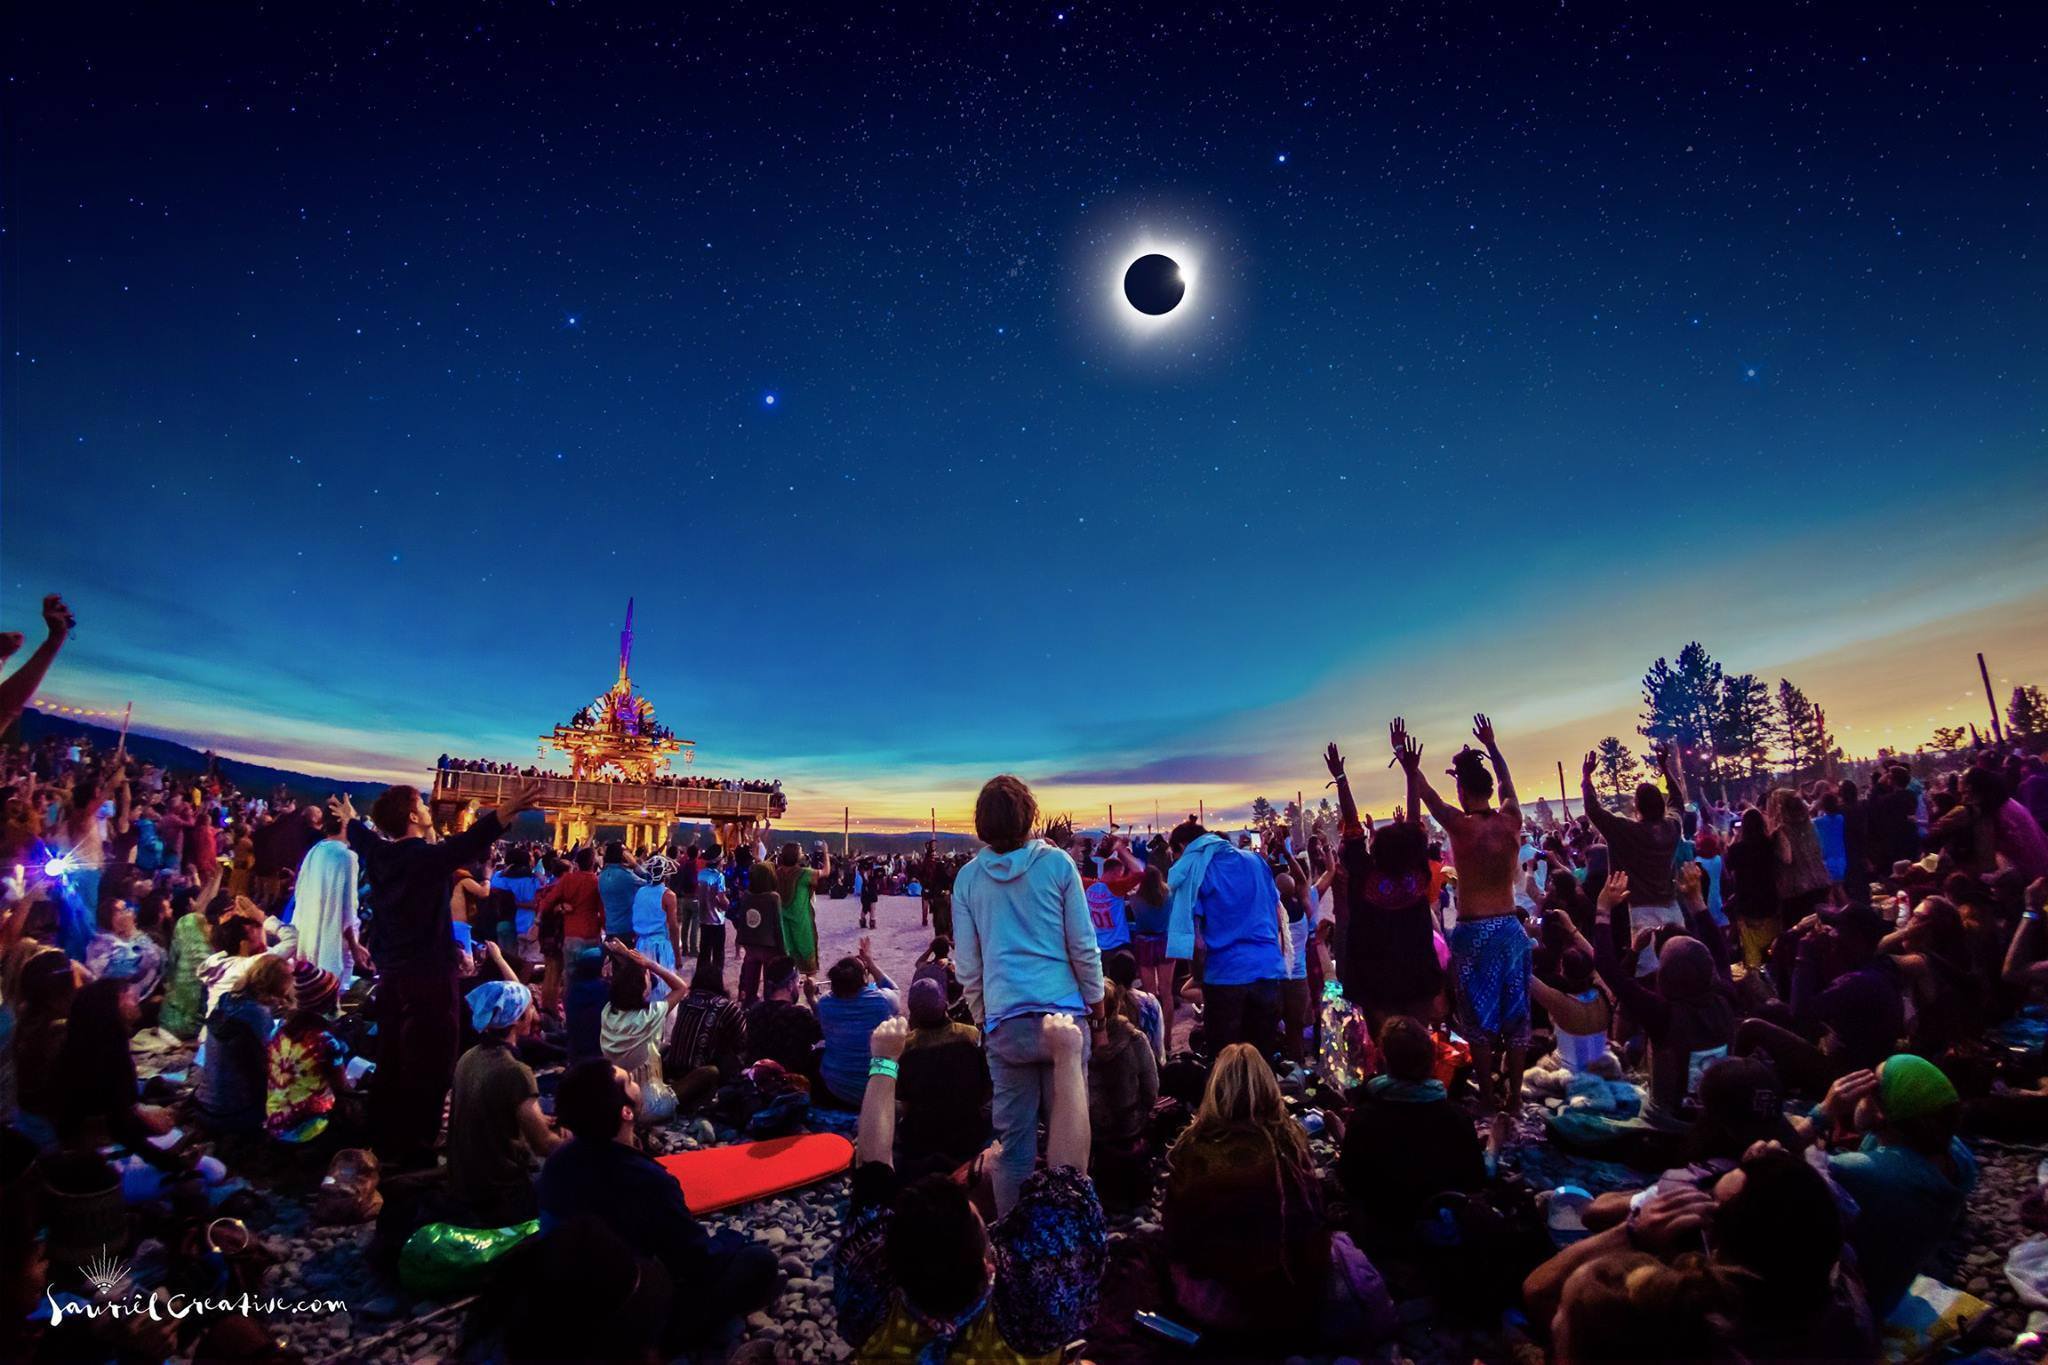 Remembering the 2017 Solar Eclipse With the Most Mindblowing Oregon Images